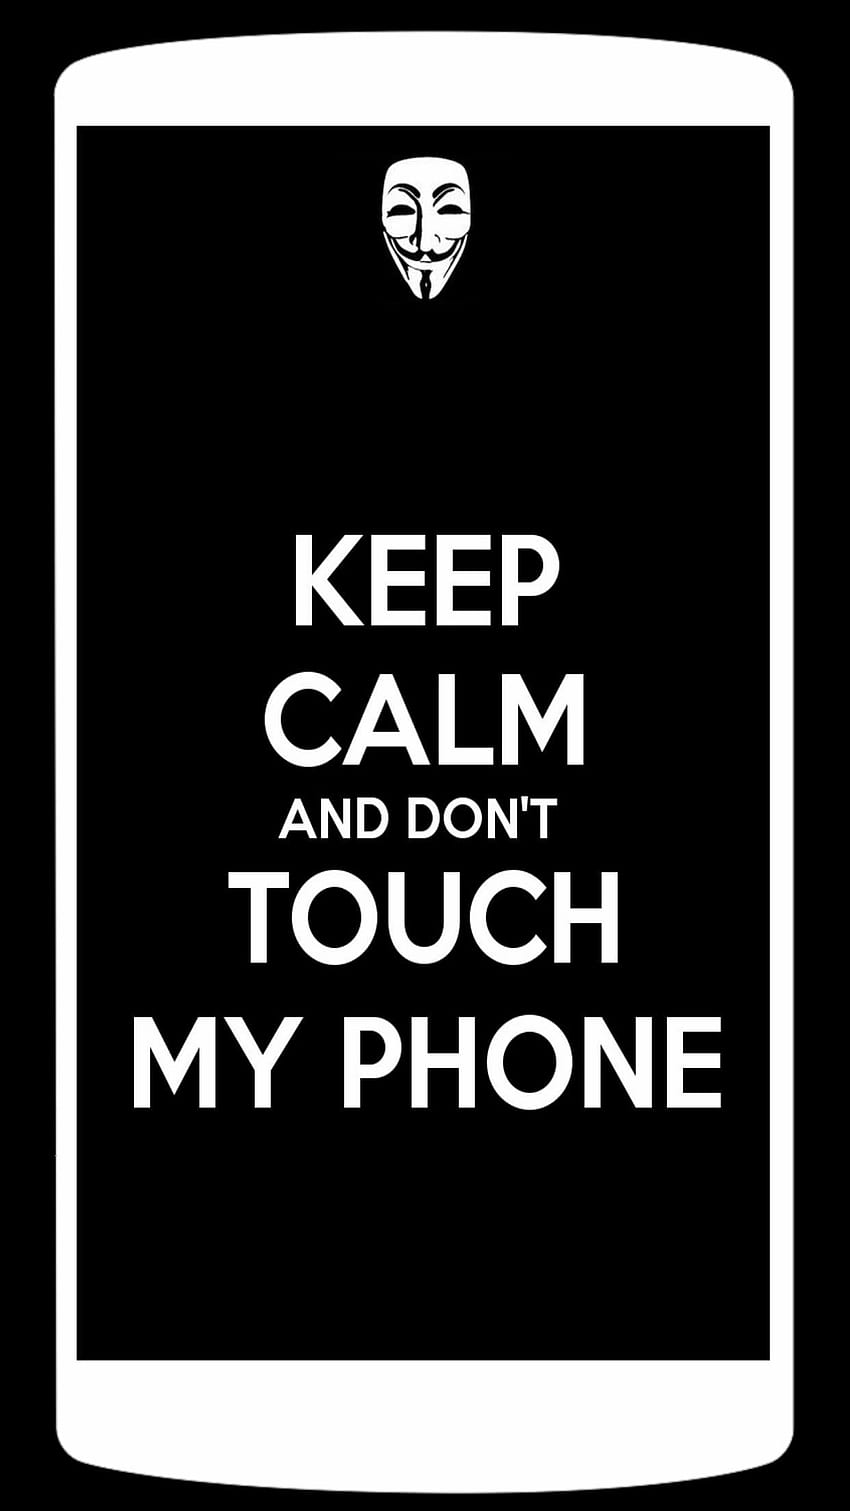 Keep Calm and Don't Touch My Phone, Don't Touch My Phone, Keep Calm 平静を保つ HD電話の壁紙